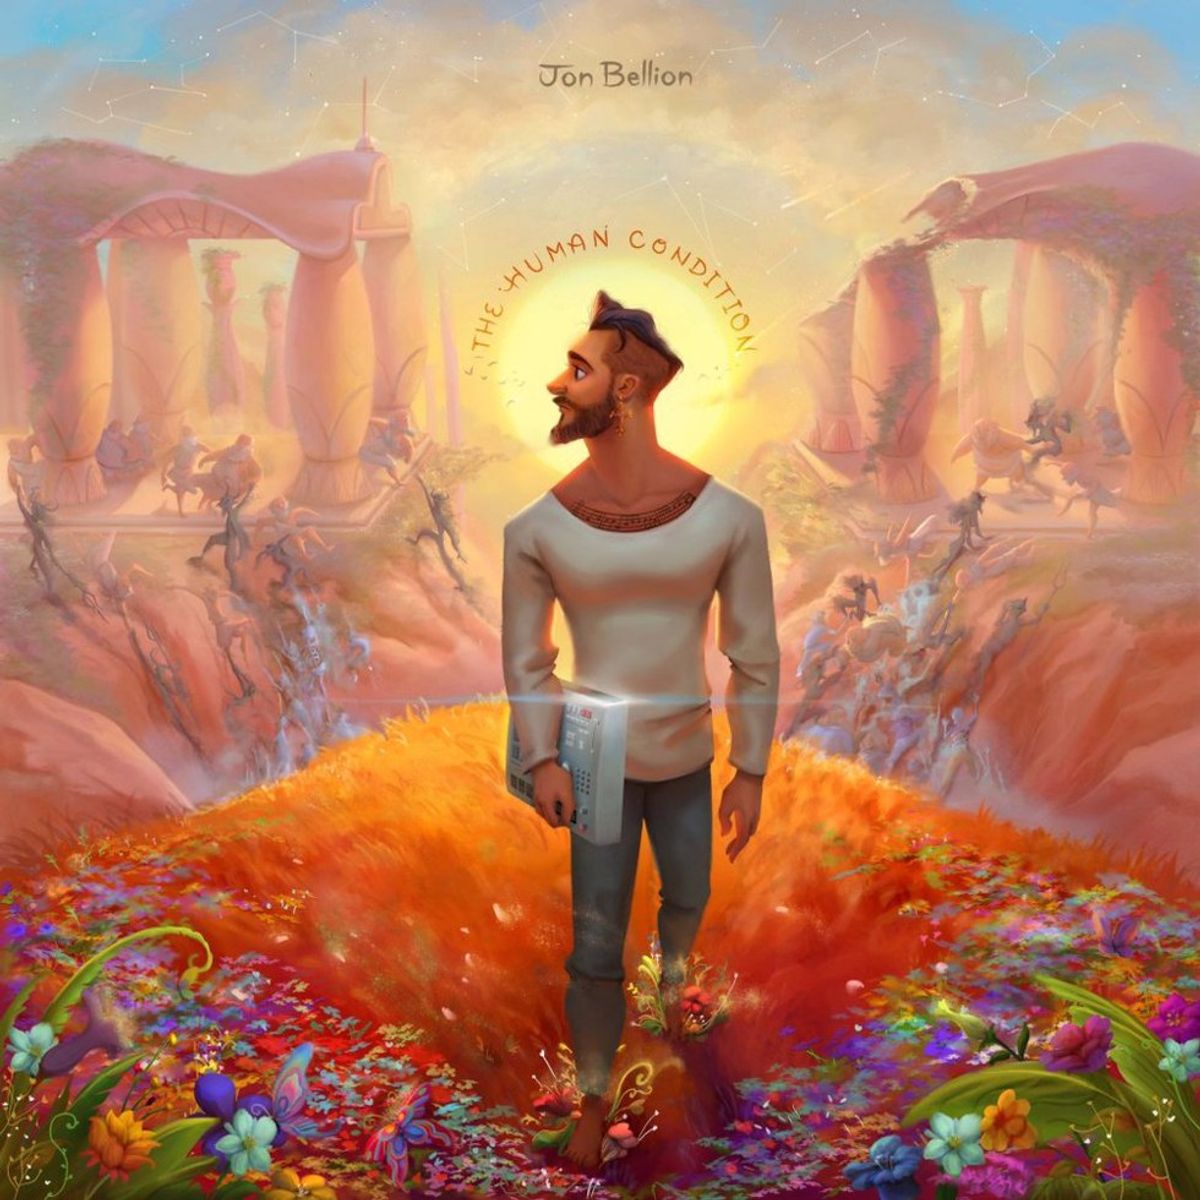 5 Best Songs From Jon Bellion's Debut Album And Their Meaning